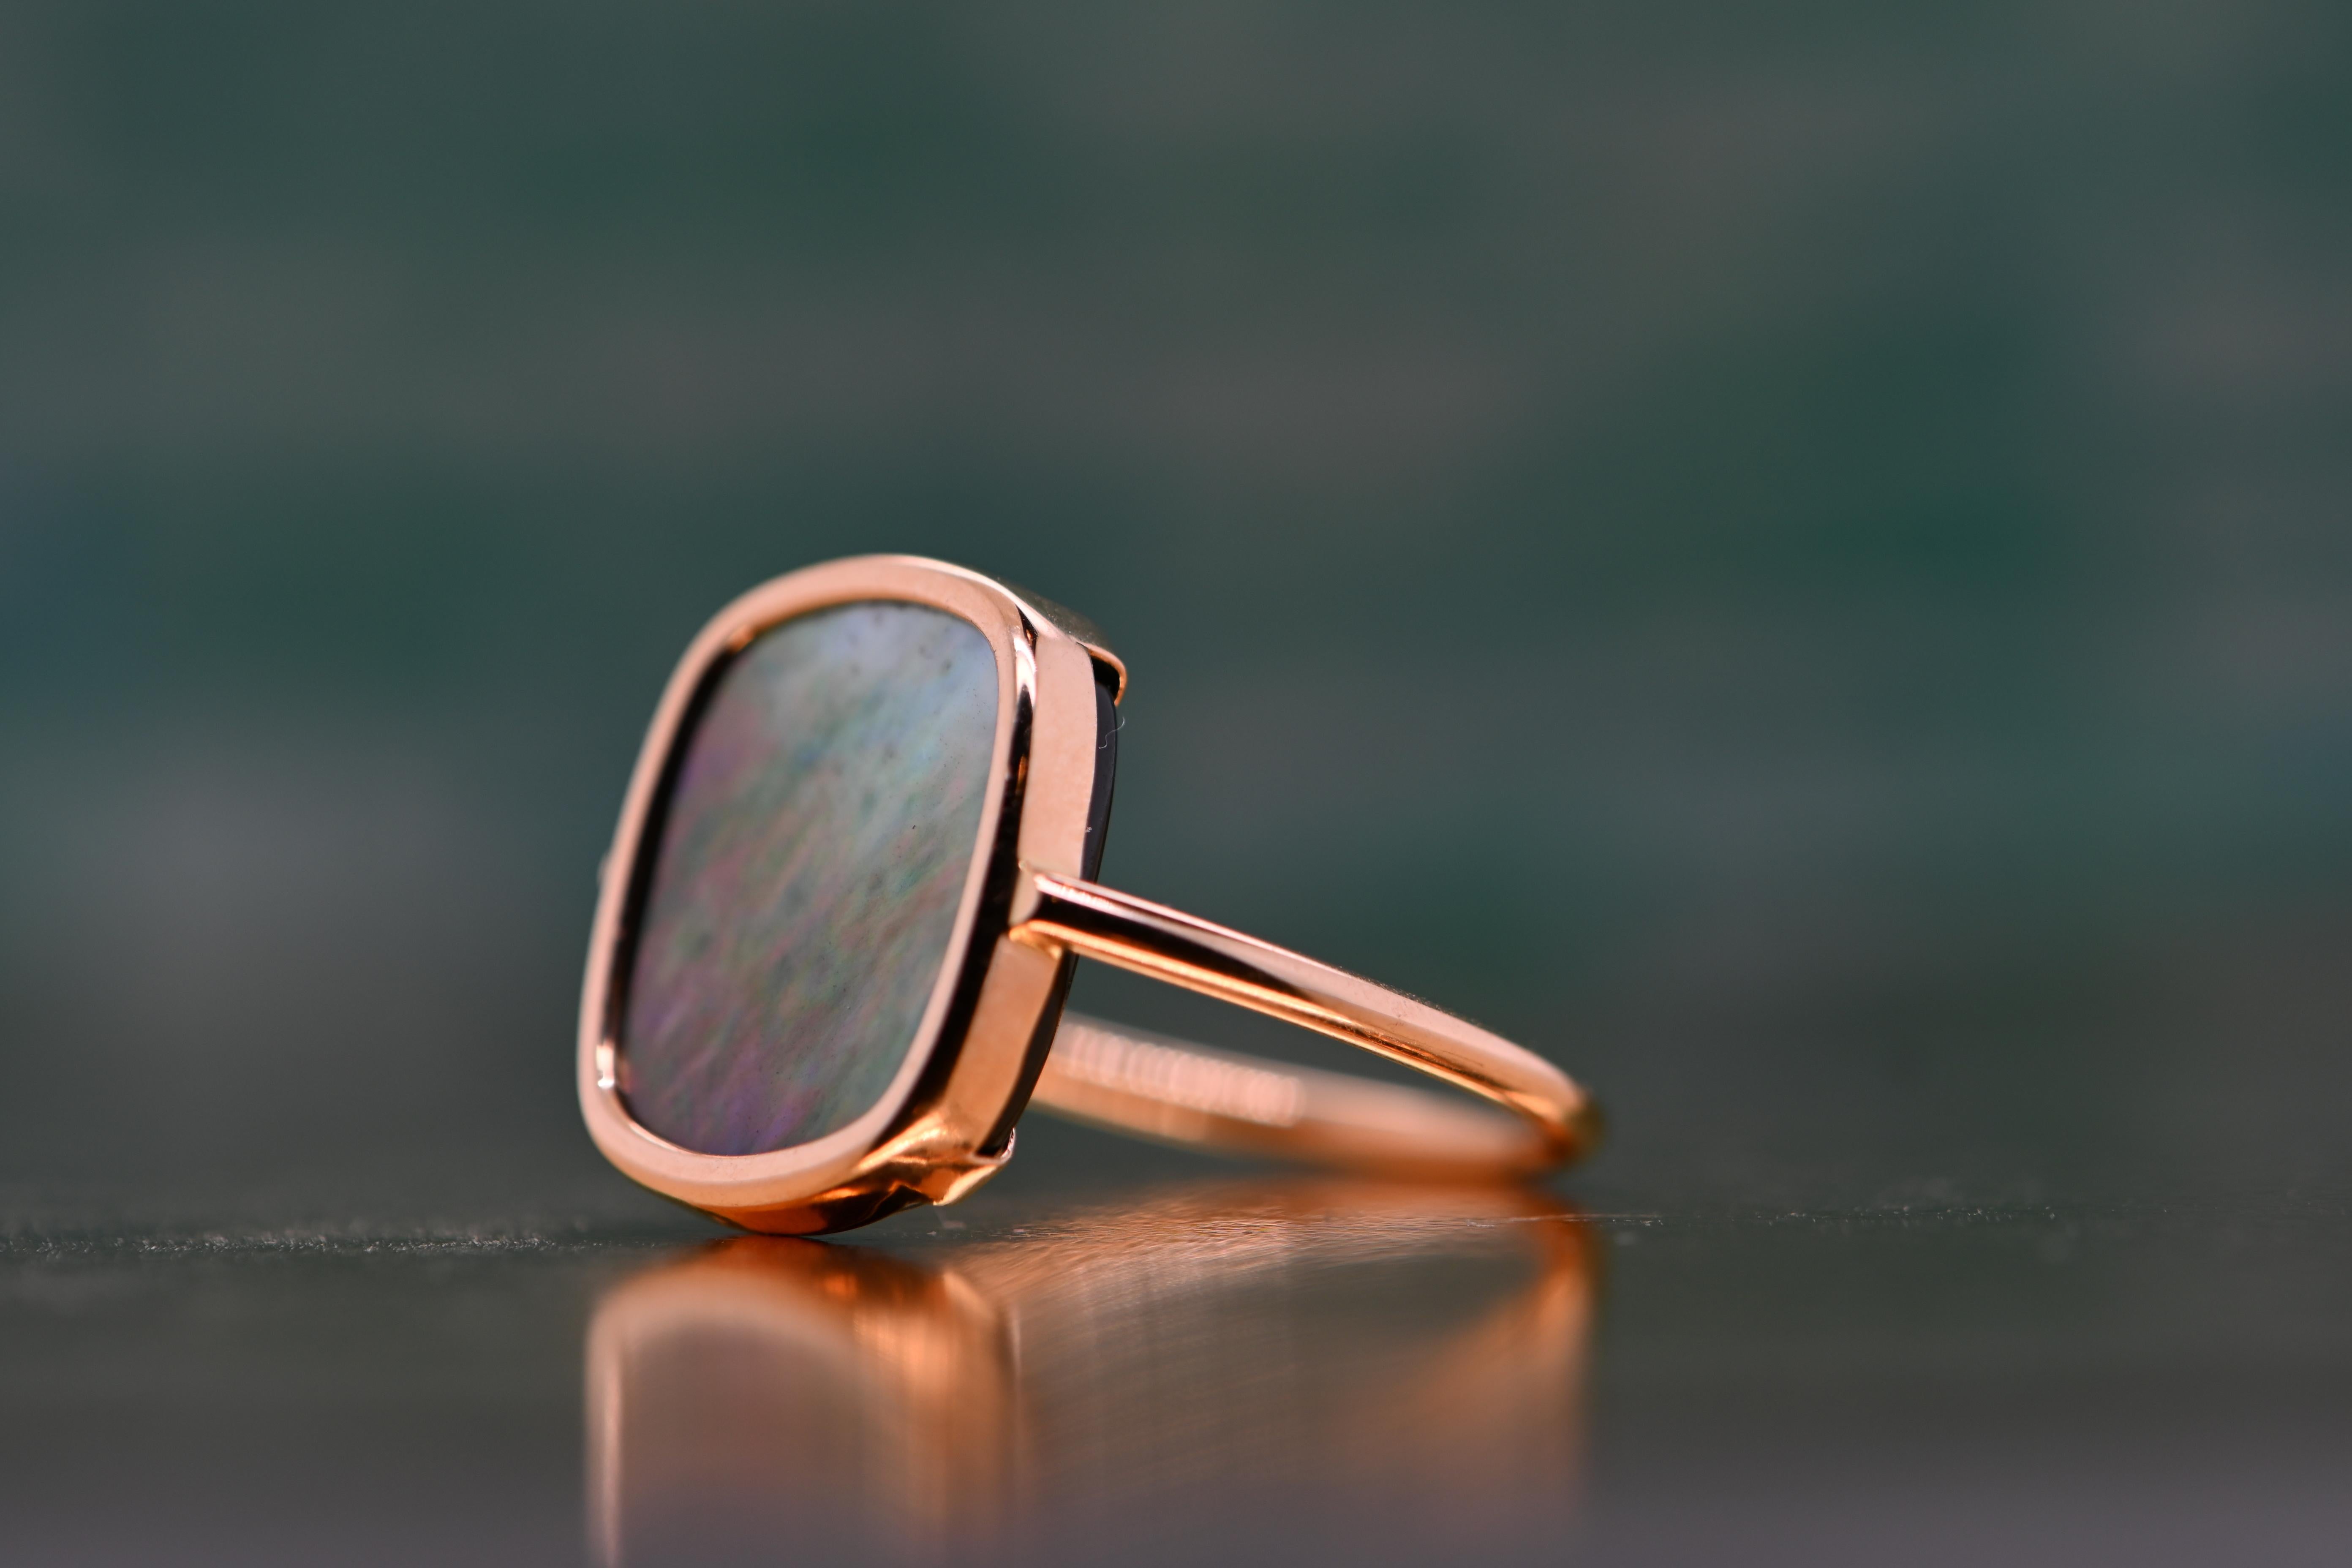 Welcome to Mesure et Art du Temps, your exquisite destination for unique and refined jewelry. We are delighted to present this sumptuous 18k rose gold ring, a true work of art that combines the elegance of design with the brilliance of quality